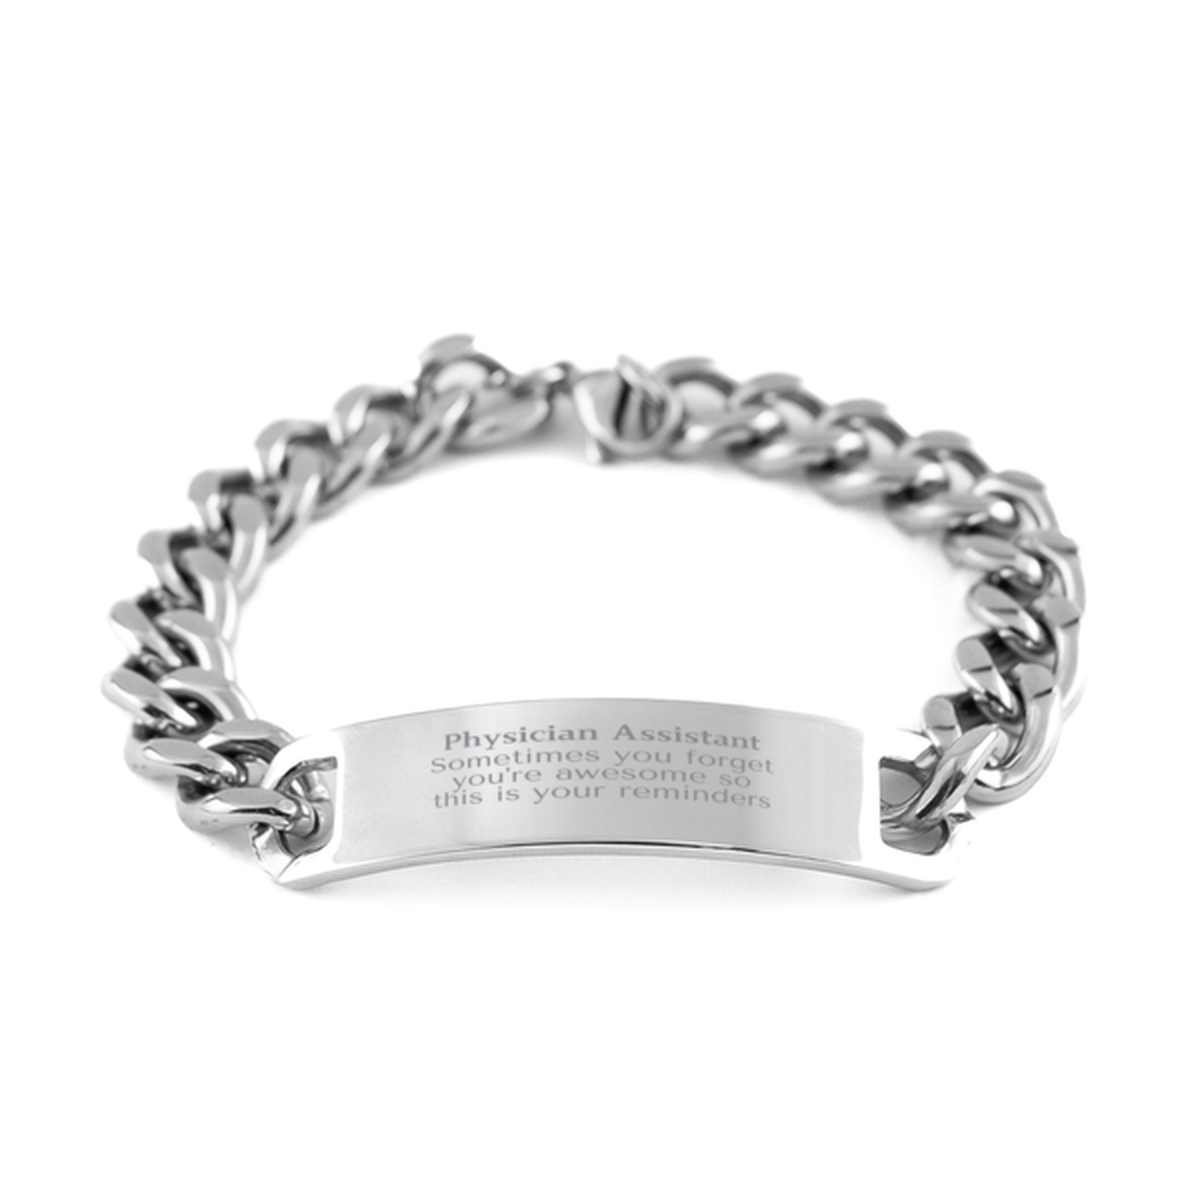 Sentimental Physician Assistant Cuban Chain Stainless Steel Bracelet, Physician Assistant Sometimes you forget you're awesome so this is your reminders, Graduation Christmas Birthday Gifts for Physician Assistant, Men, Women, Coworkers